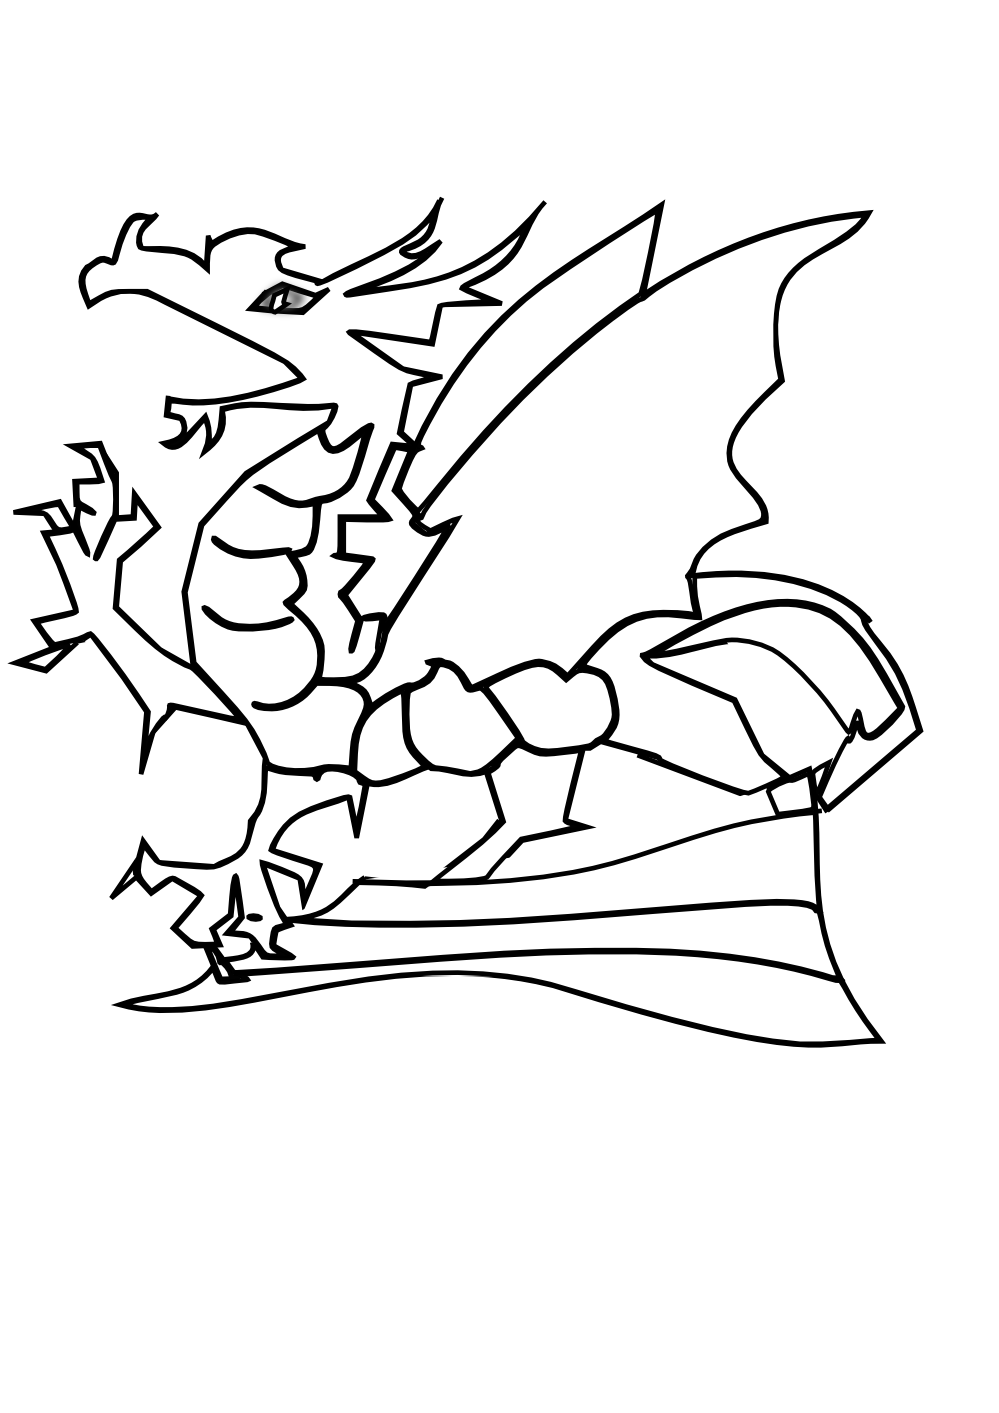 dragons cute coloring page